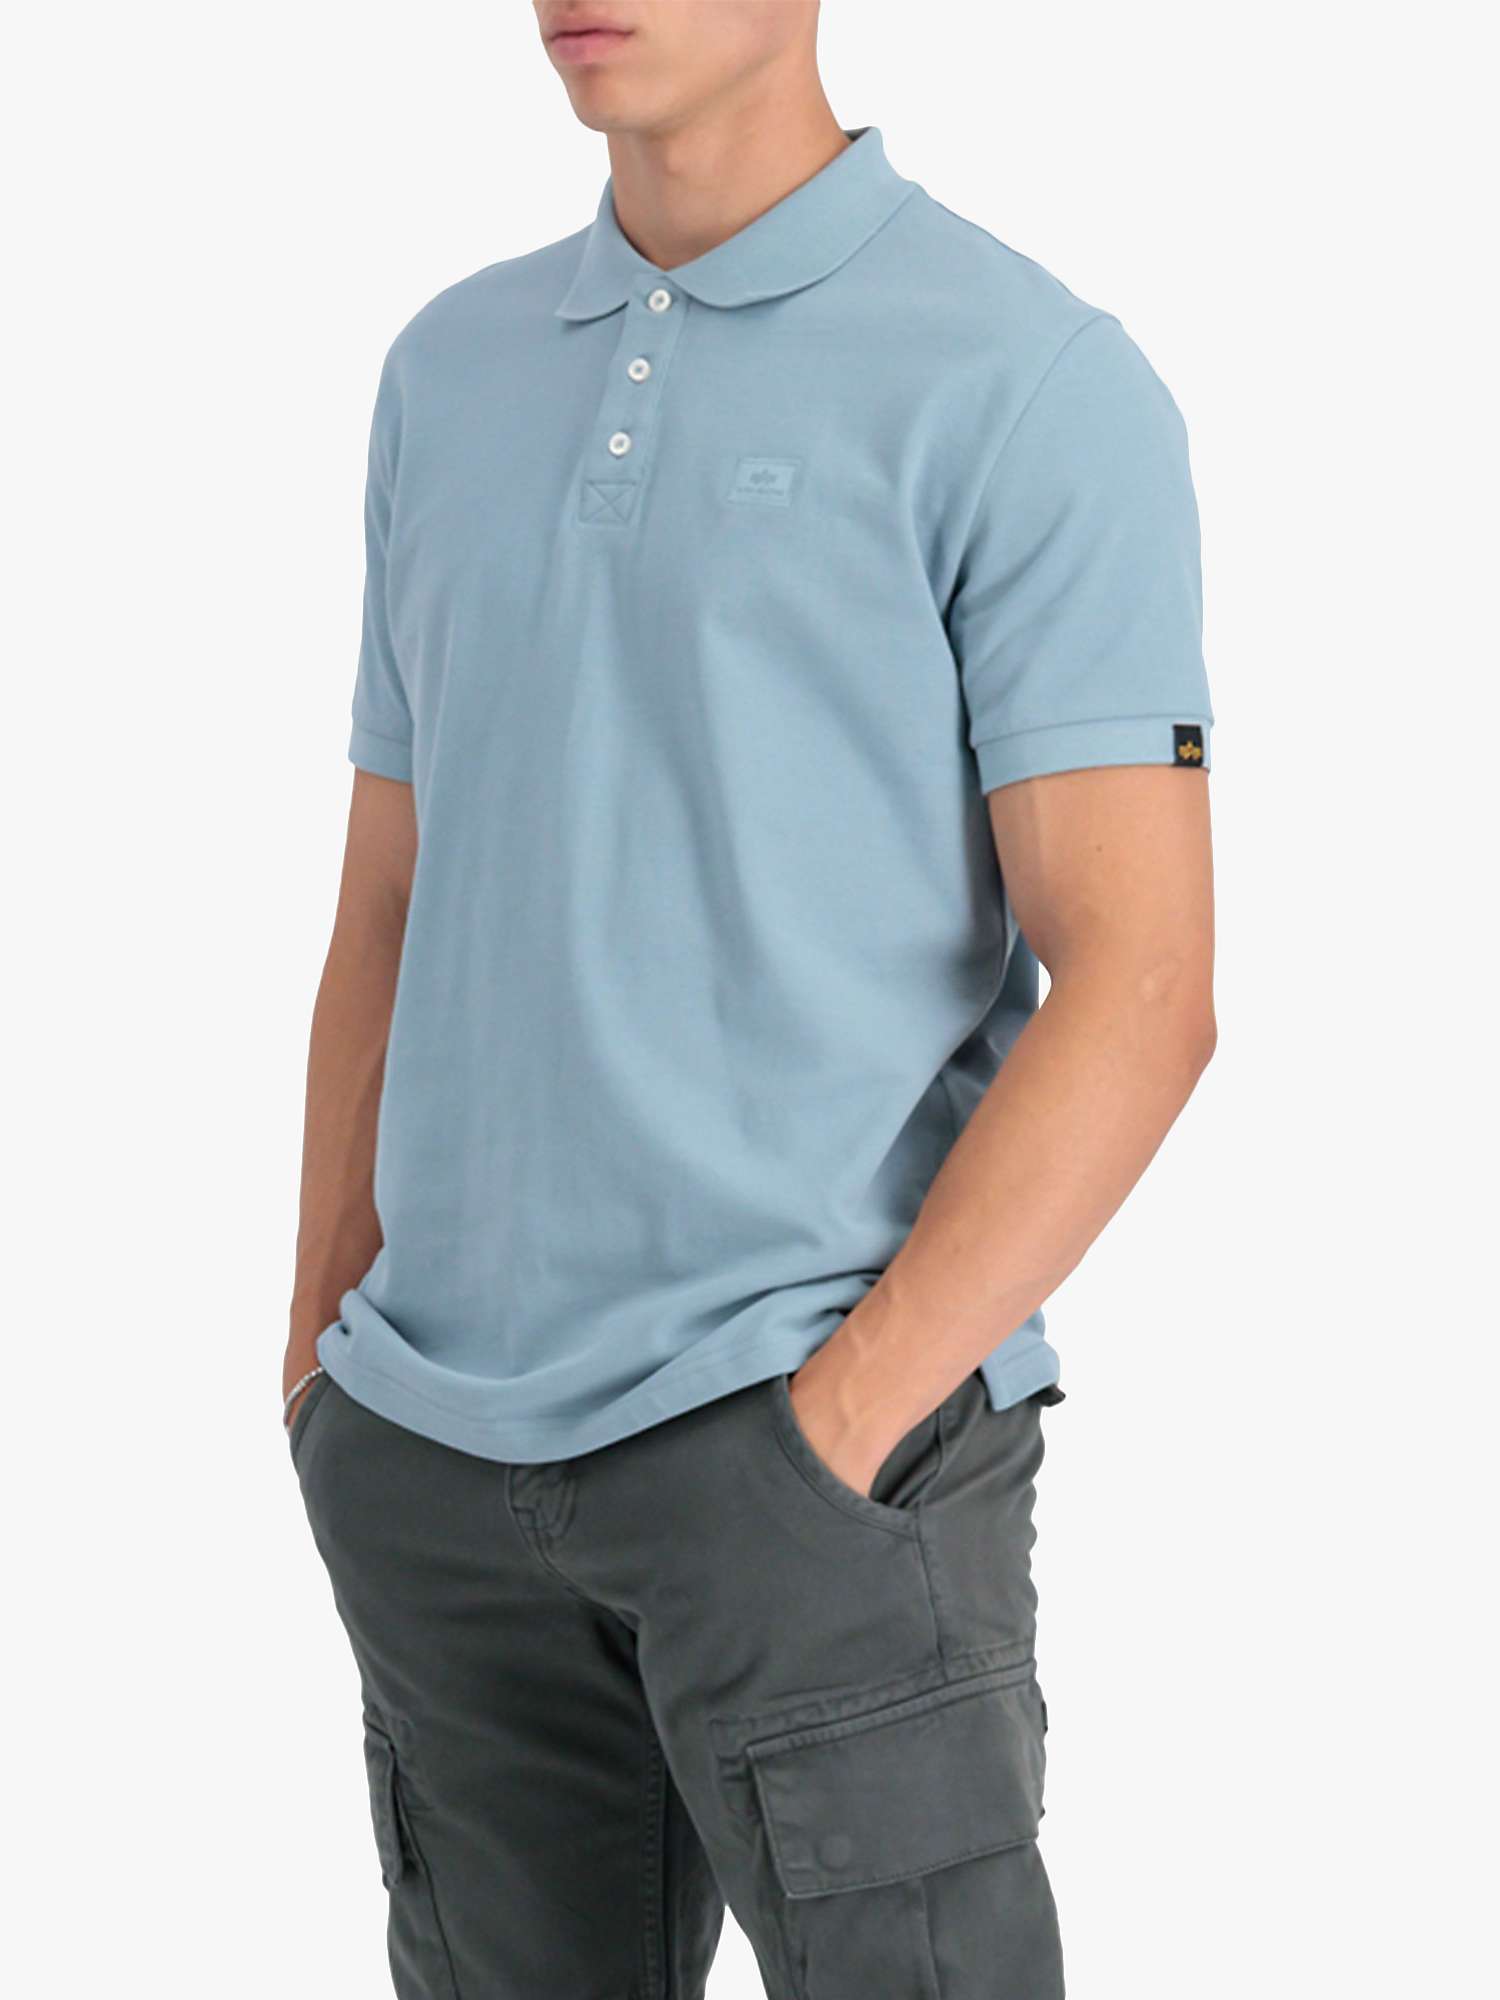 Alpha Industries X-Fit Polo, Greyblue at John Lewis & Partners